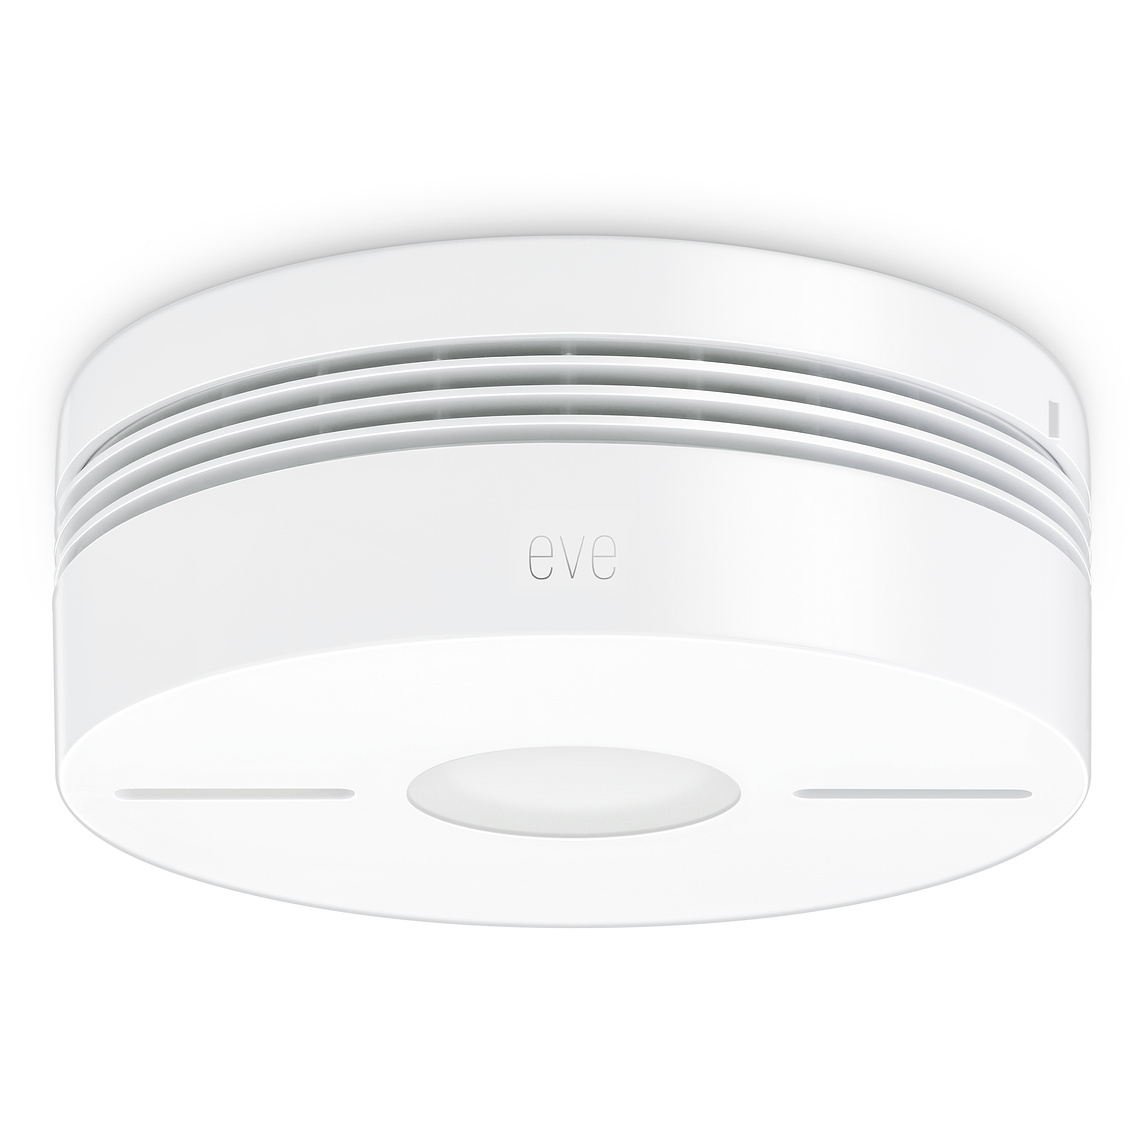 Best Smoke Alarms For Kitchens 2020